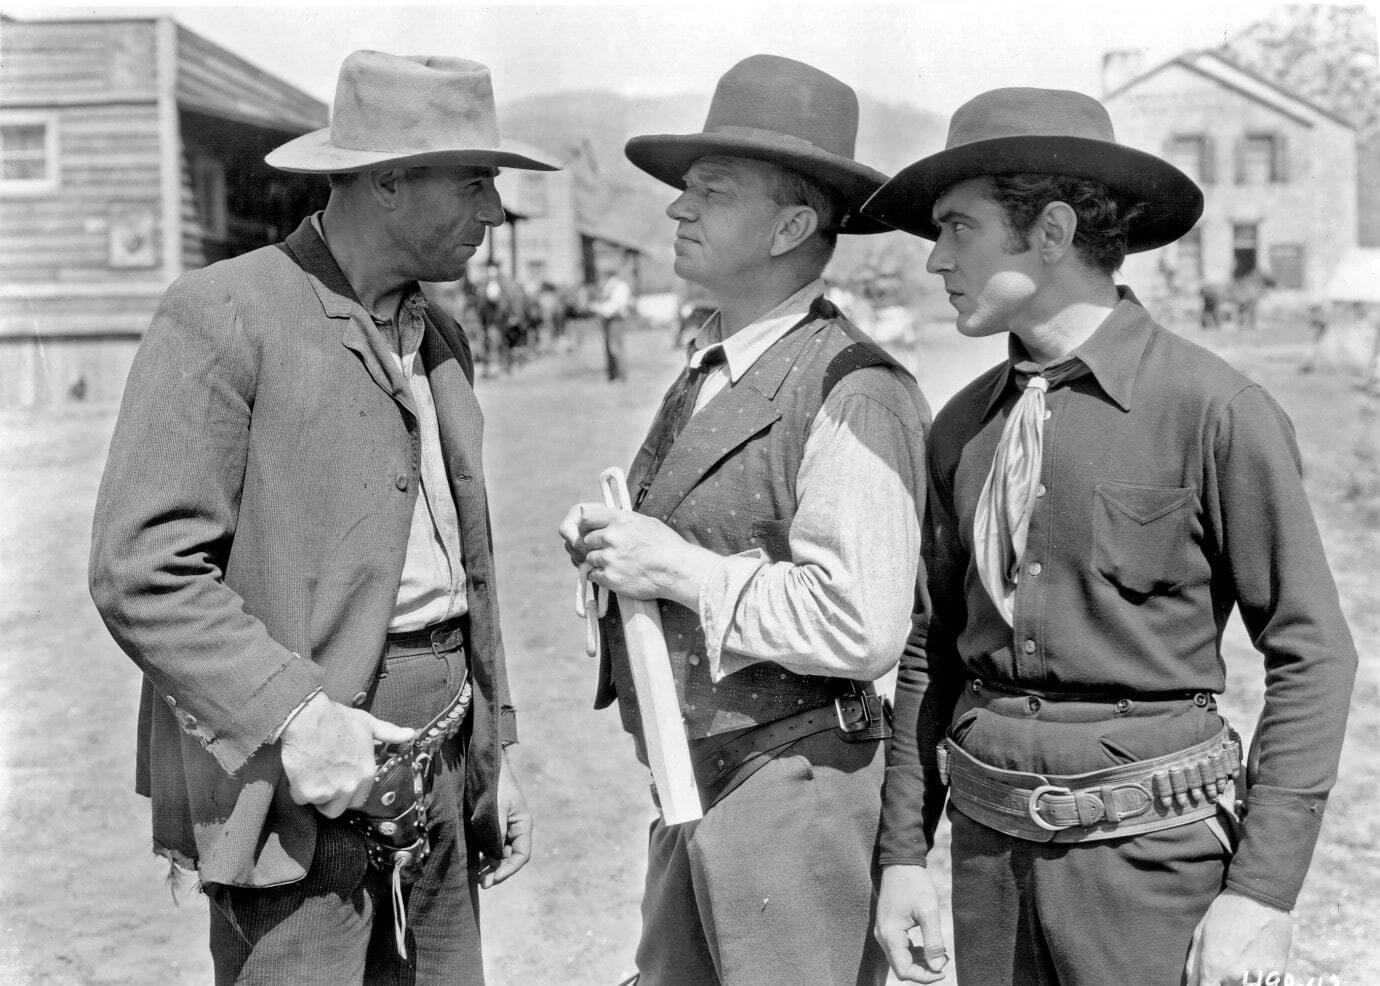 <p>The 1930 film <a href="https://www.imdb.com/title/tt0020693/?ref_=ttco_co_tt"><em>Billy the Kid</em></a> featured <a href="https://www.imdb.com/name/nm0113902/?ref_=tt_cl_t_1" title="https://www.imdb.com/name/nm0113902/?ref_=tt_cl_t_1">John Mack Brown</a> in the titular role, hunted down, captured and re-captured by Sheriff Pat Garrett. Directed by early auteur <a href="https://www.imdb.com/name/nm0896542/?ref_=tt_ov_dr" title="https://www.imdb.com/name/nm0896542/?ref_=tt_ov_dr">King Vidor</a>, it was filmed in an early version of 70 mm widescreen called Realife, and was <a href="https://www.imdb.com/title/tt0033389/?ref_=nv_sr_srsg_0" title="https://www.imdb.com/title/tt0033389/?ref_=nv_sr_srsg_0">remade in 1941</a>.</p>